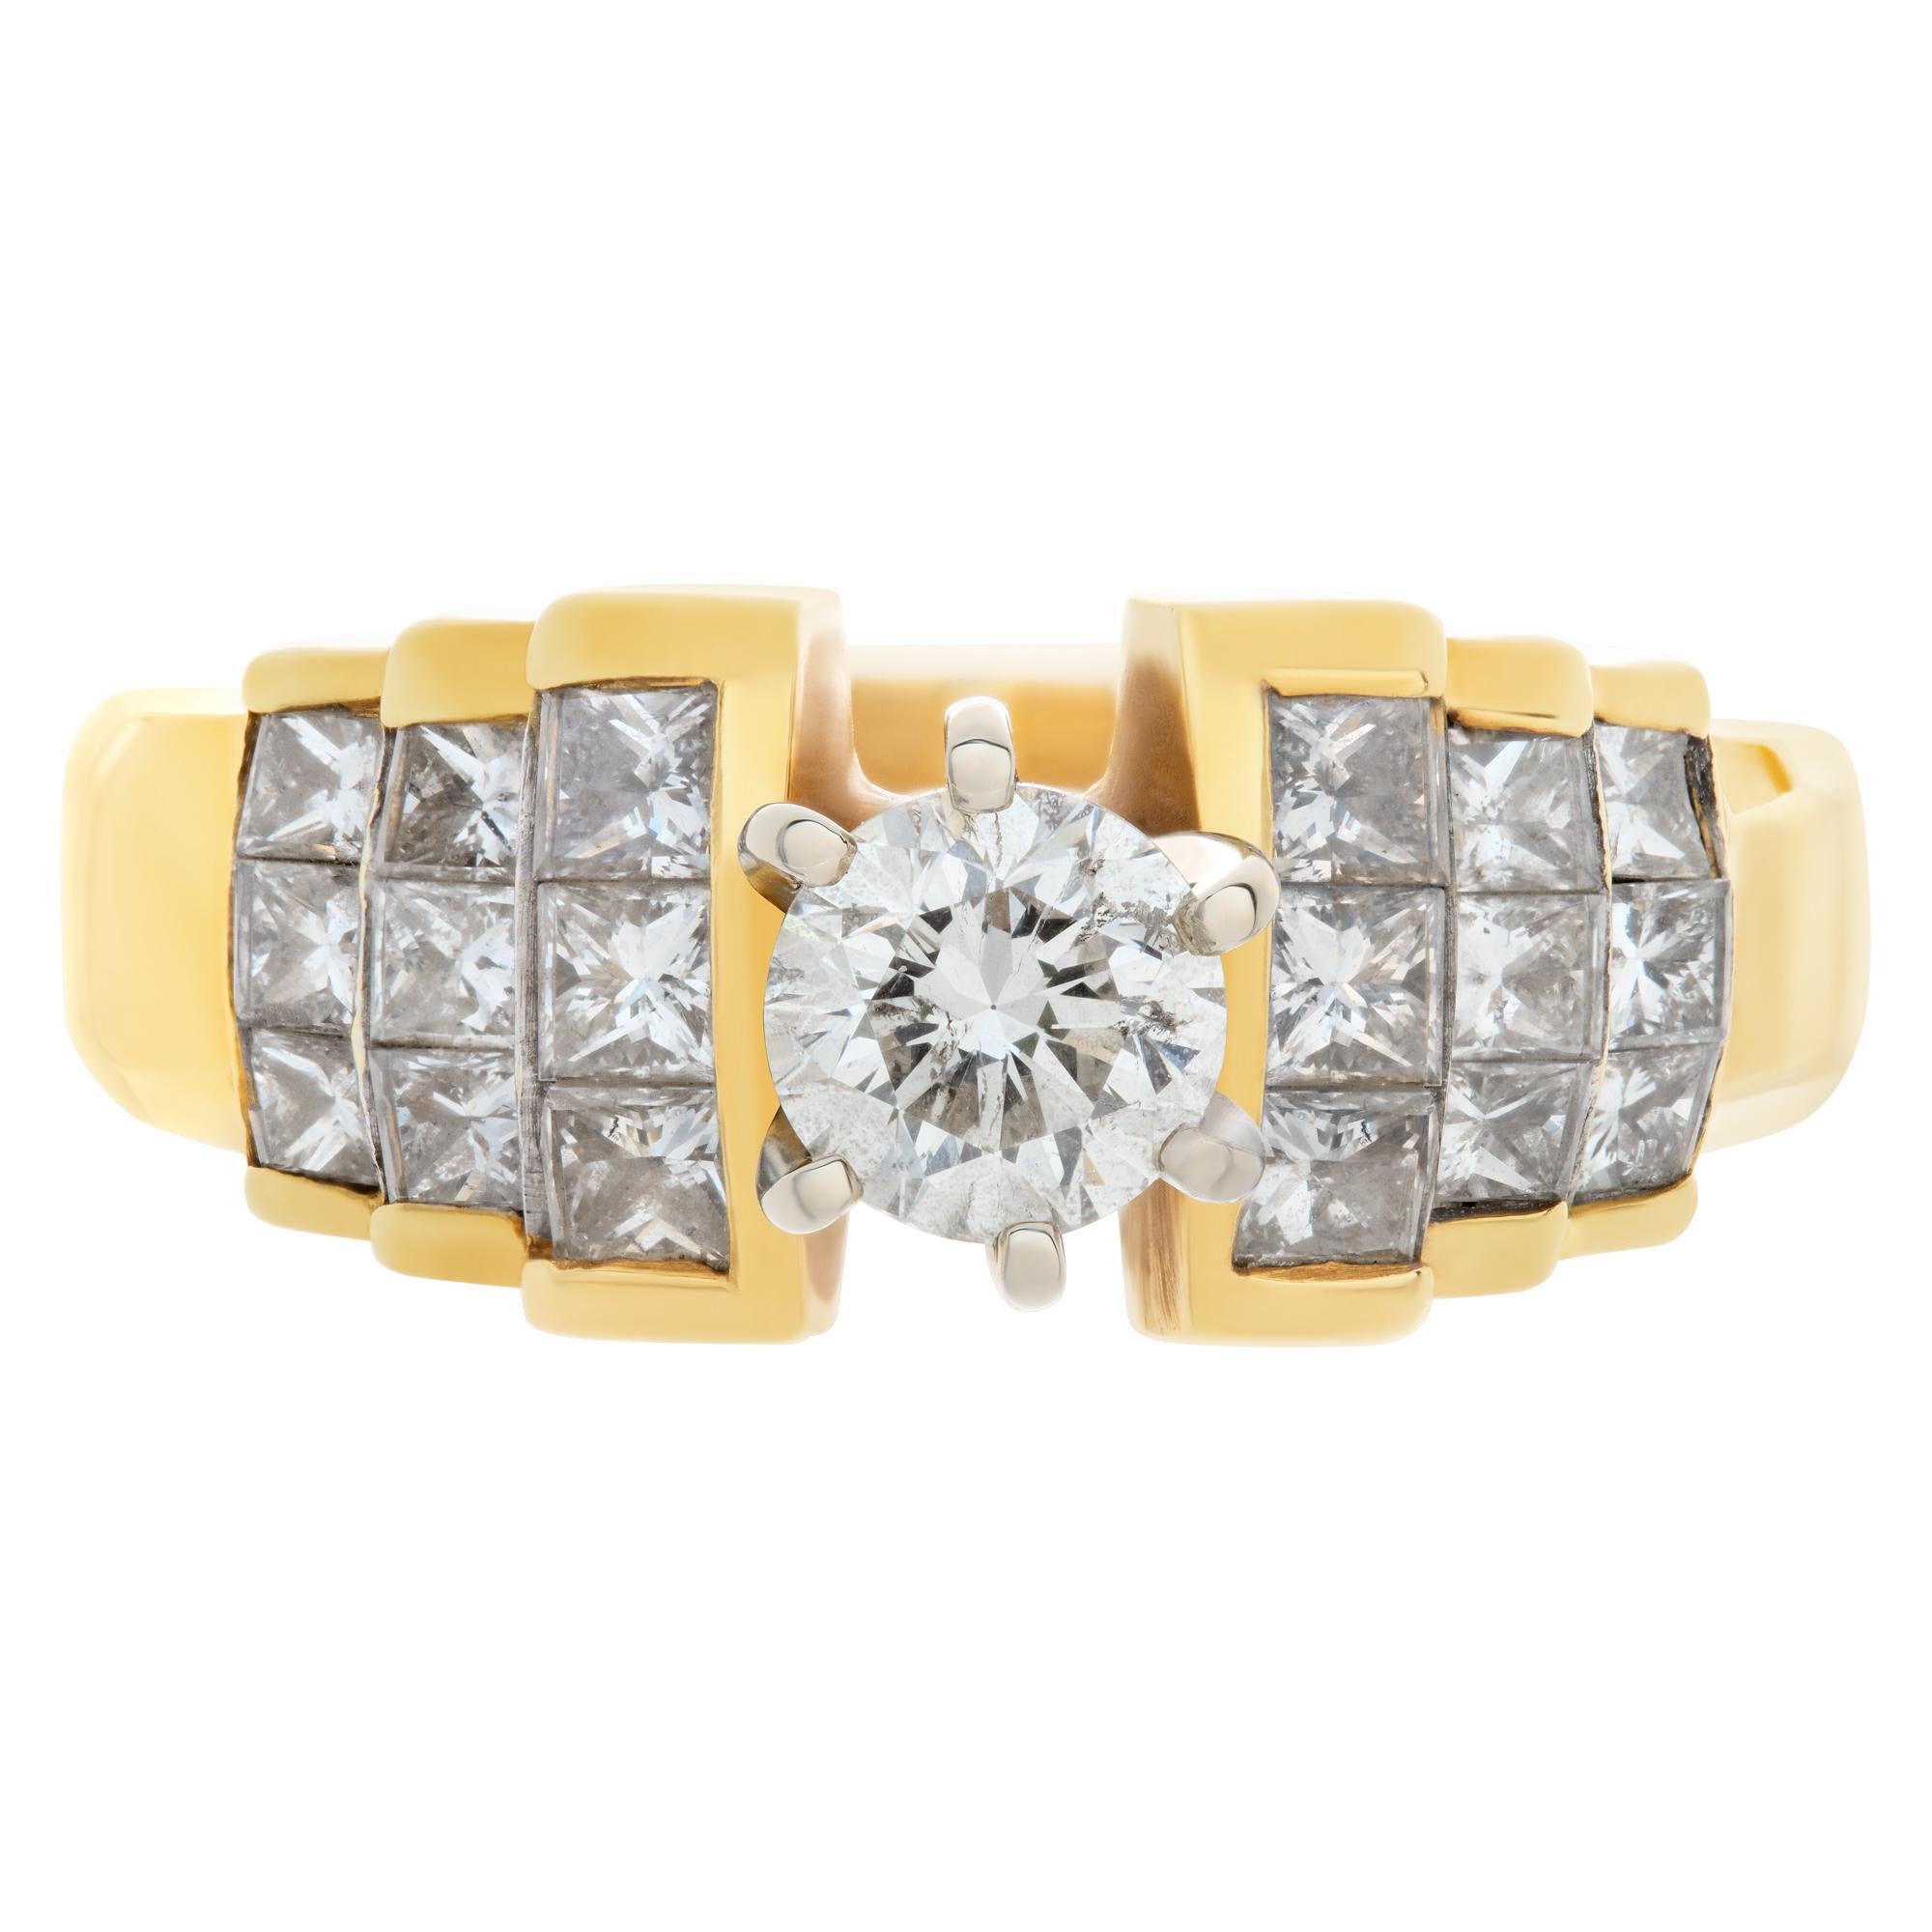 Diamond engagement ring with approximately 0.45 carat center round diamond surrounded by princess cut diamonds in 18k yellow gold. G-H Color, SI to I Clarity; size 6This Diamond ring is currently size 6 and some items can be sized up or down, please